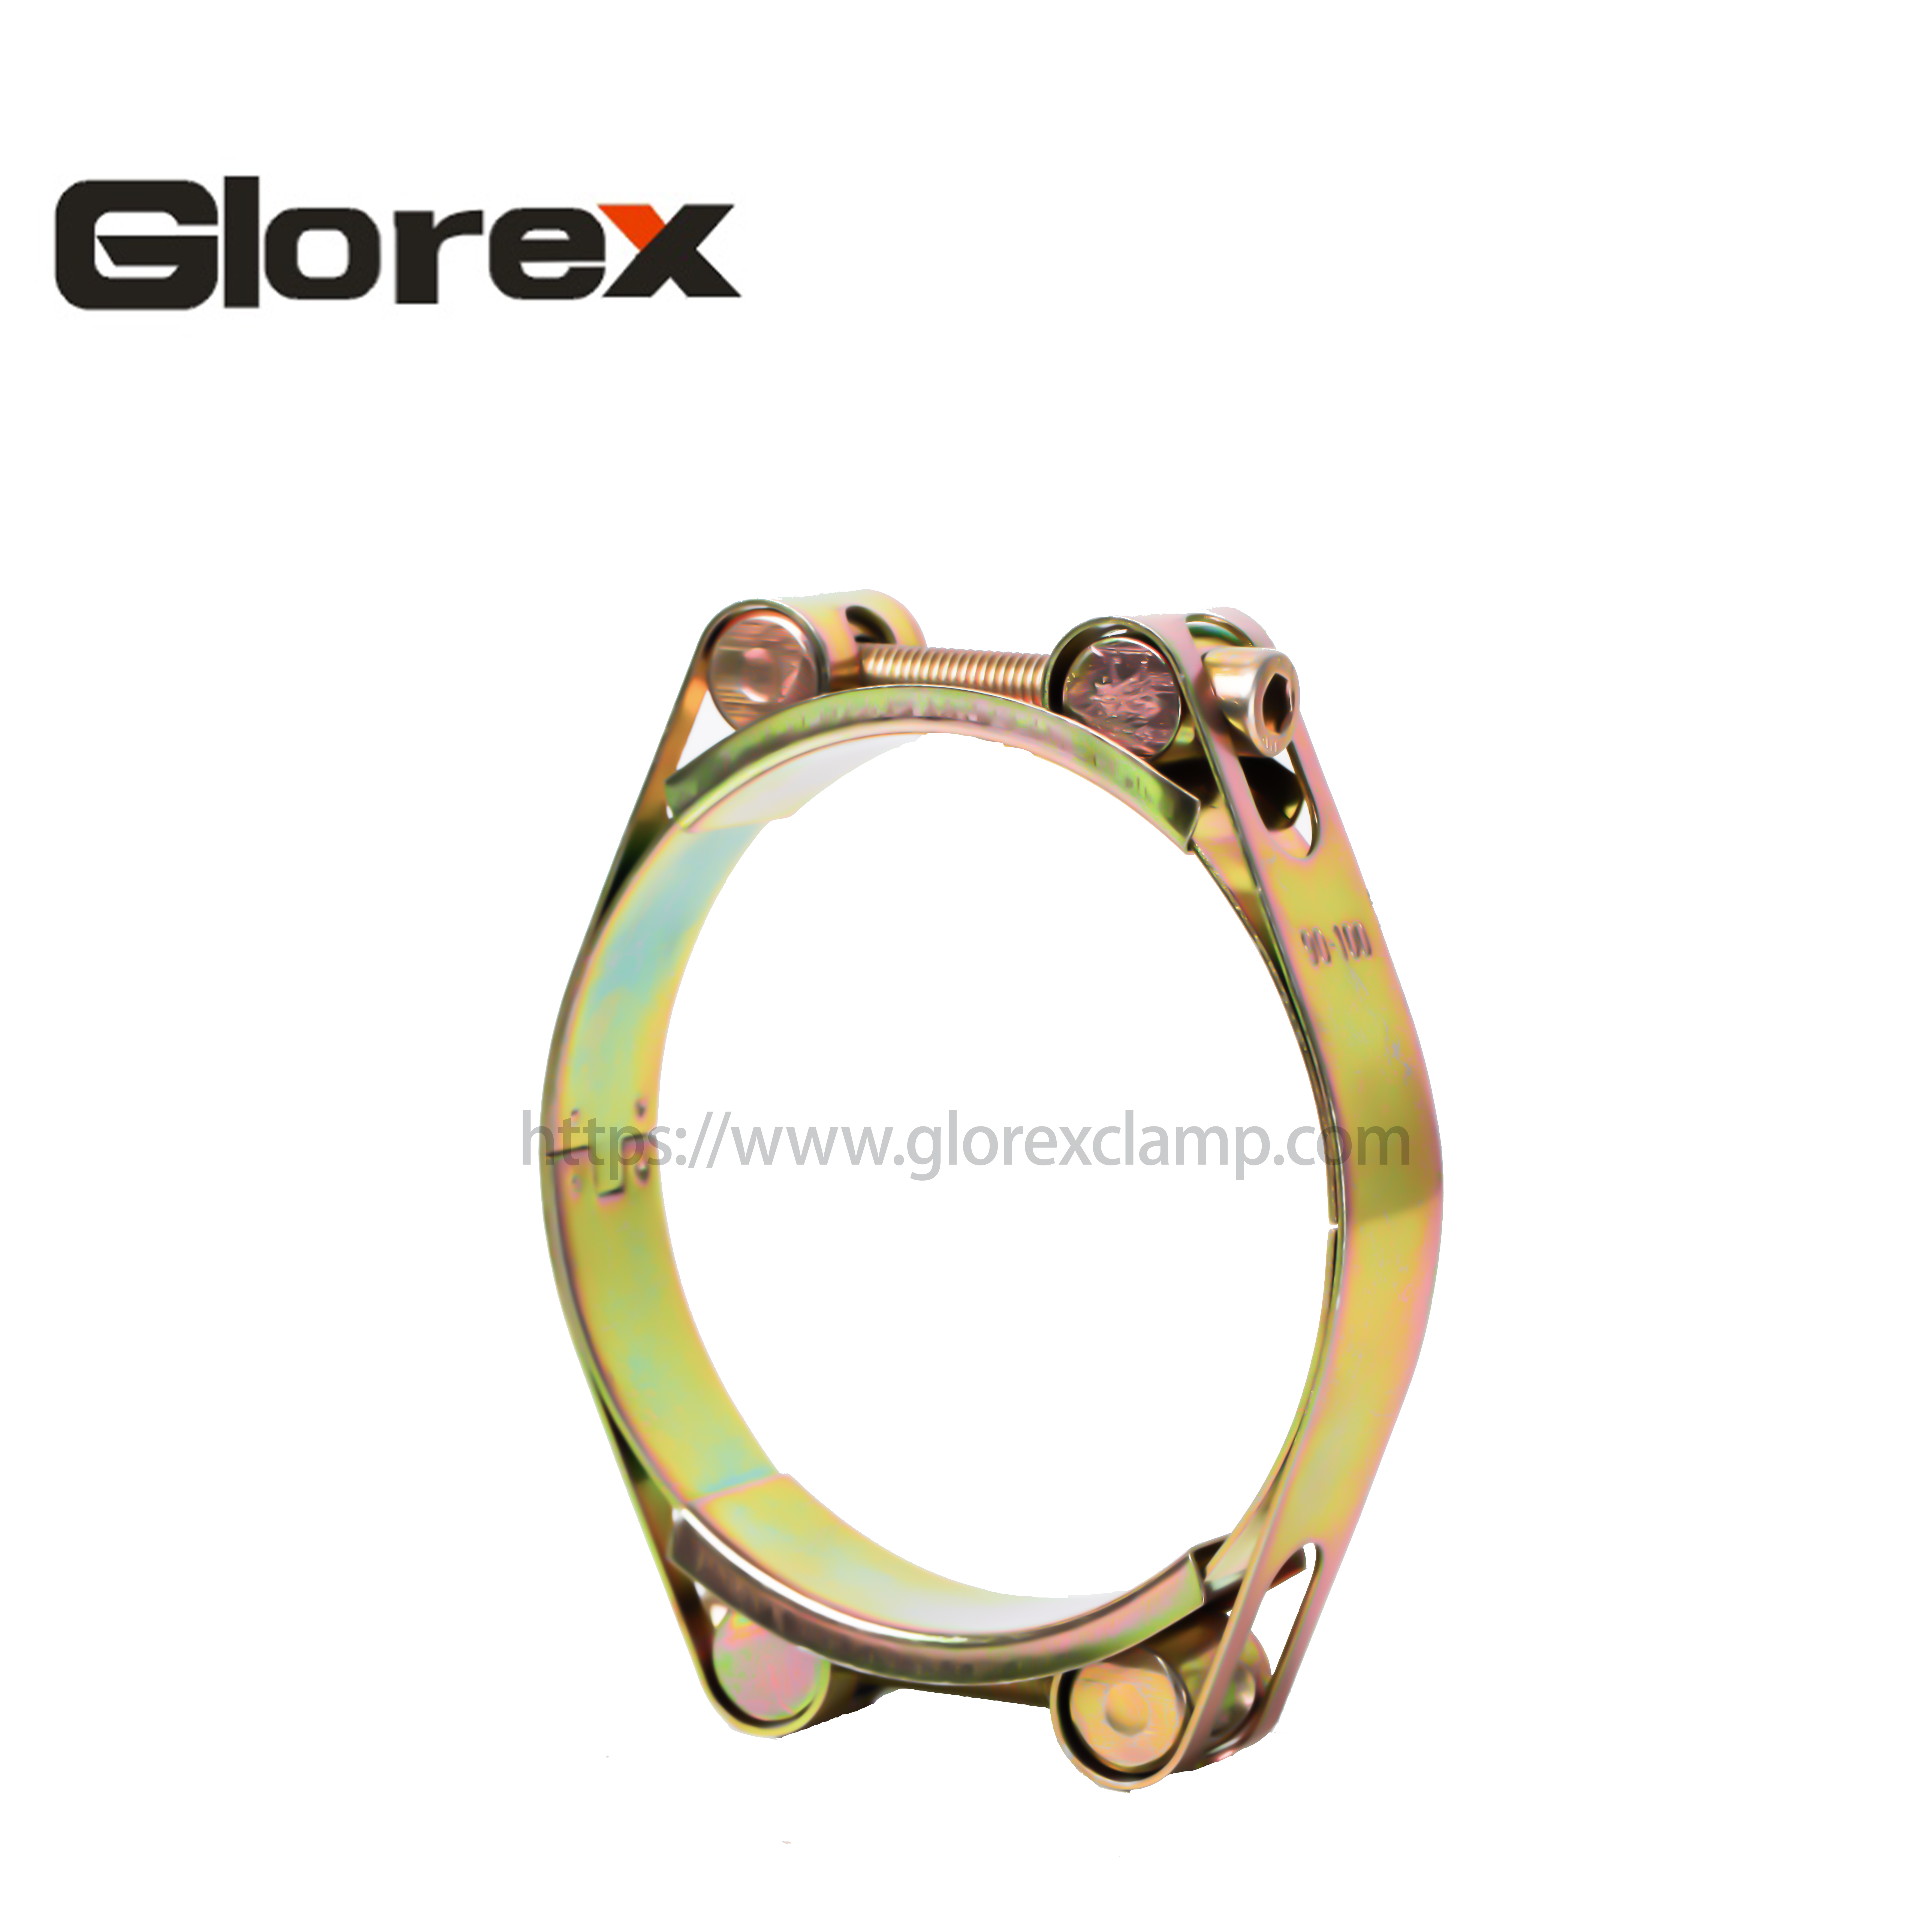 Factory Price For Silicone Hose Clamp - Robust clamp with double bolts – Glorex